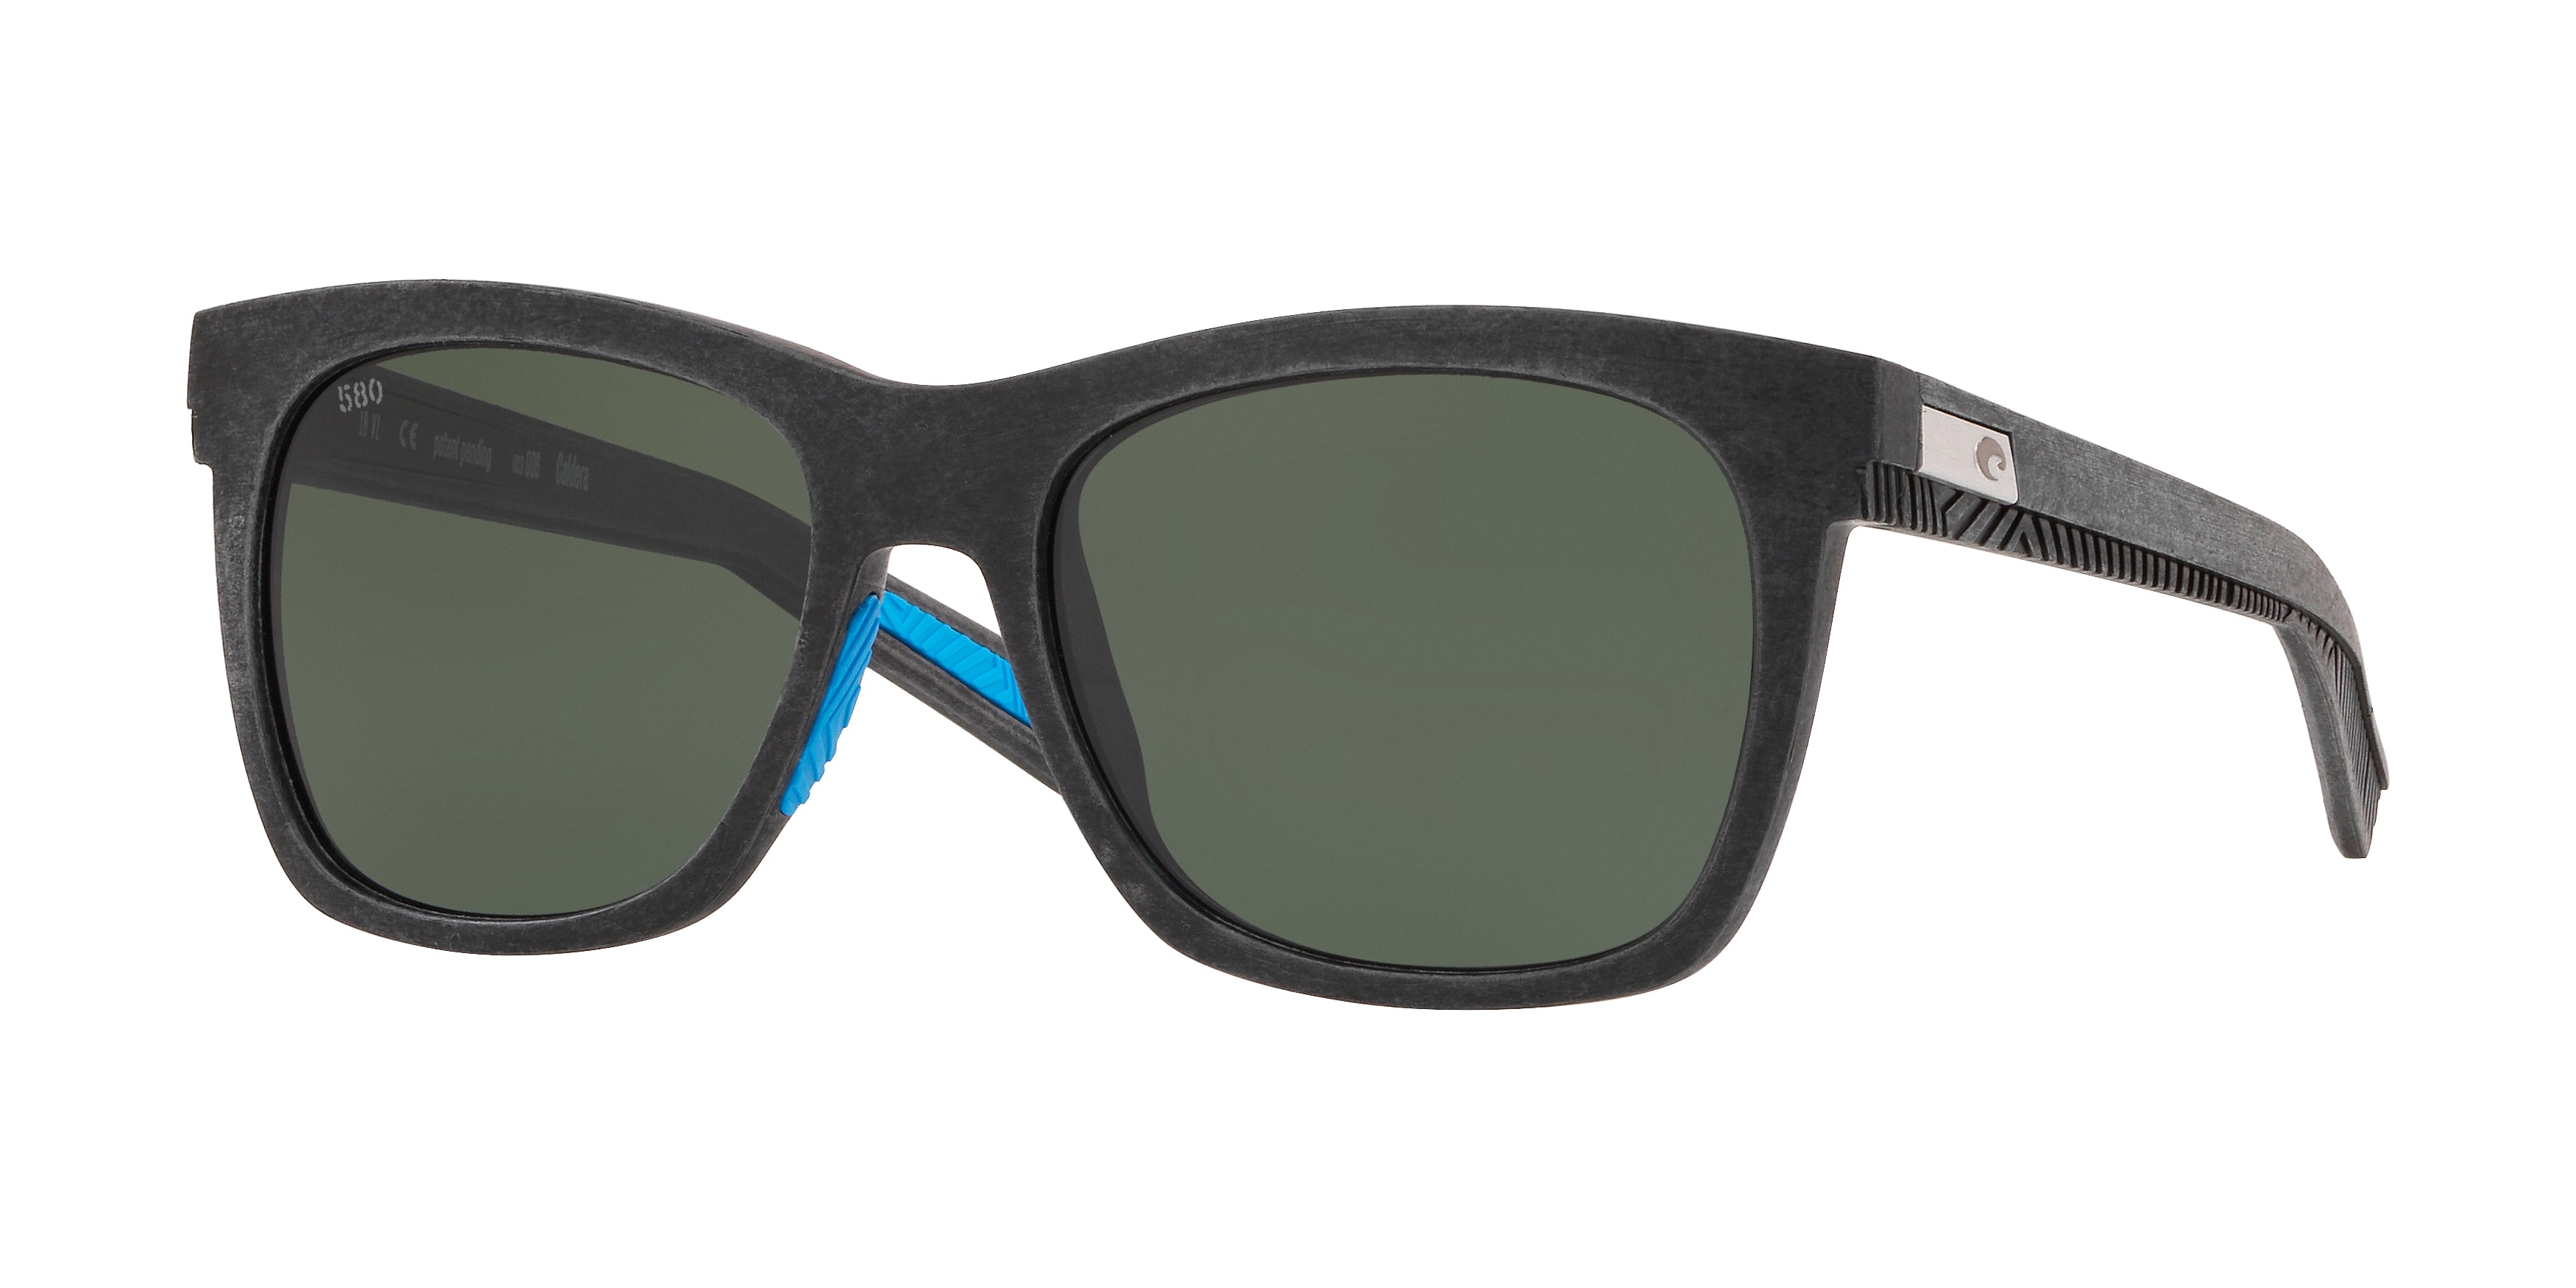 costa_06s9028_902803_net_gray_with_blue_rubber_polarized